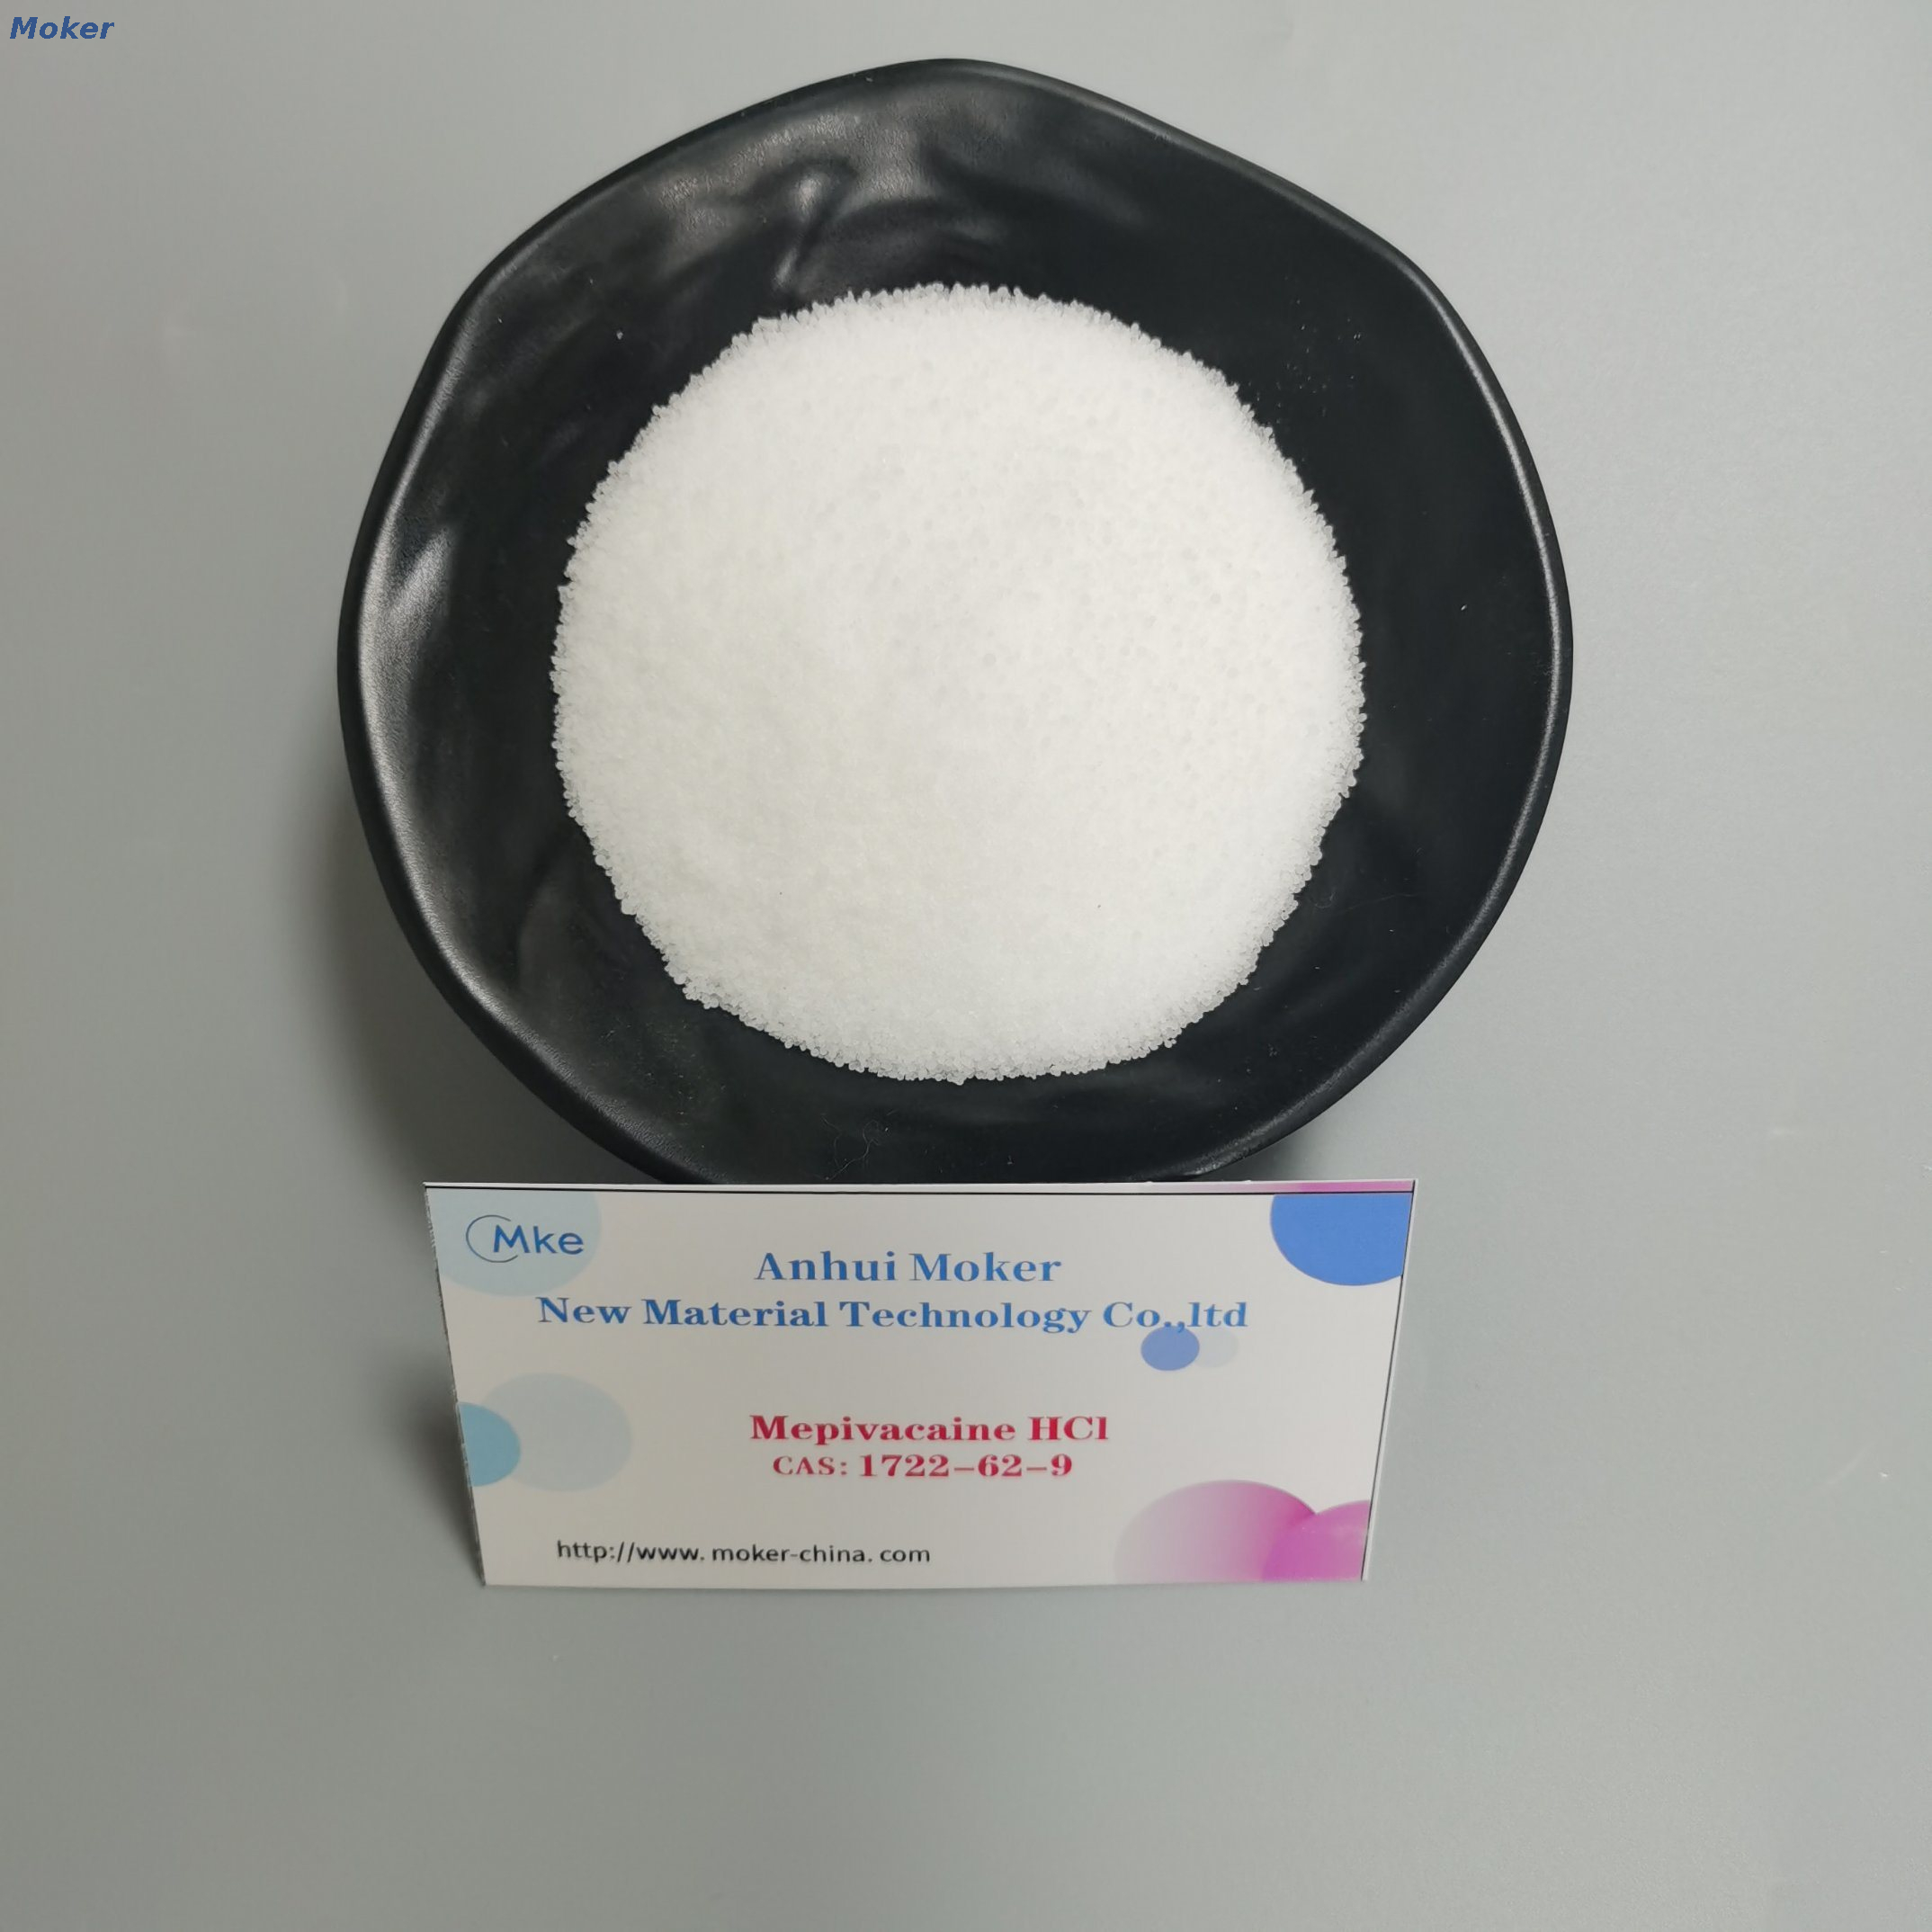 An Anti-inflammatory/analgesic Agent Local Anesthetic Mepivacaine HCl CAS 1722-62-9